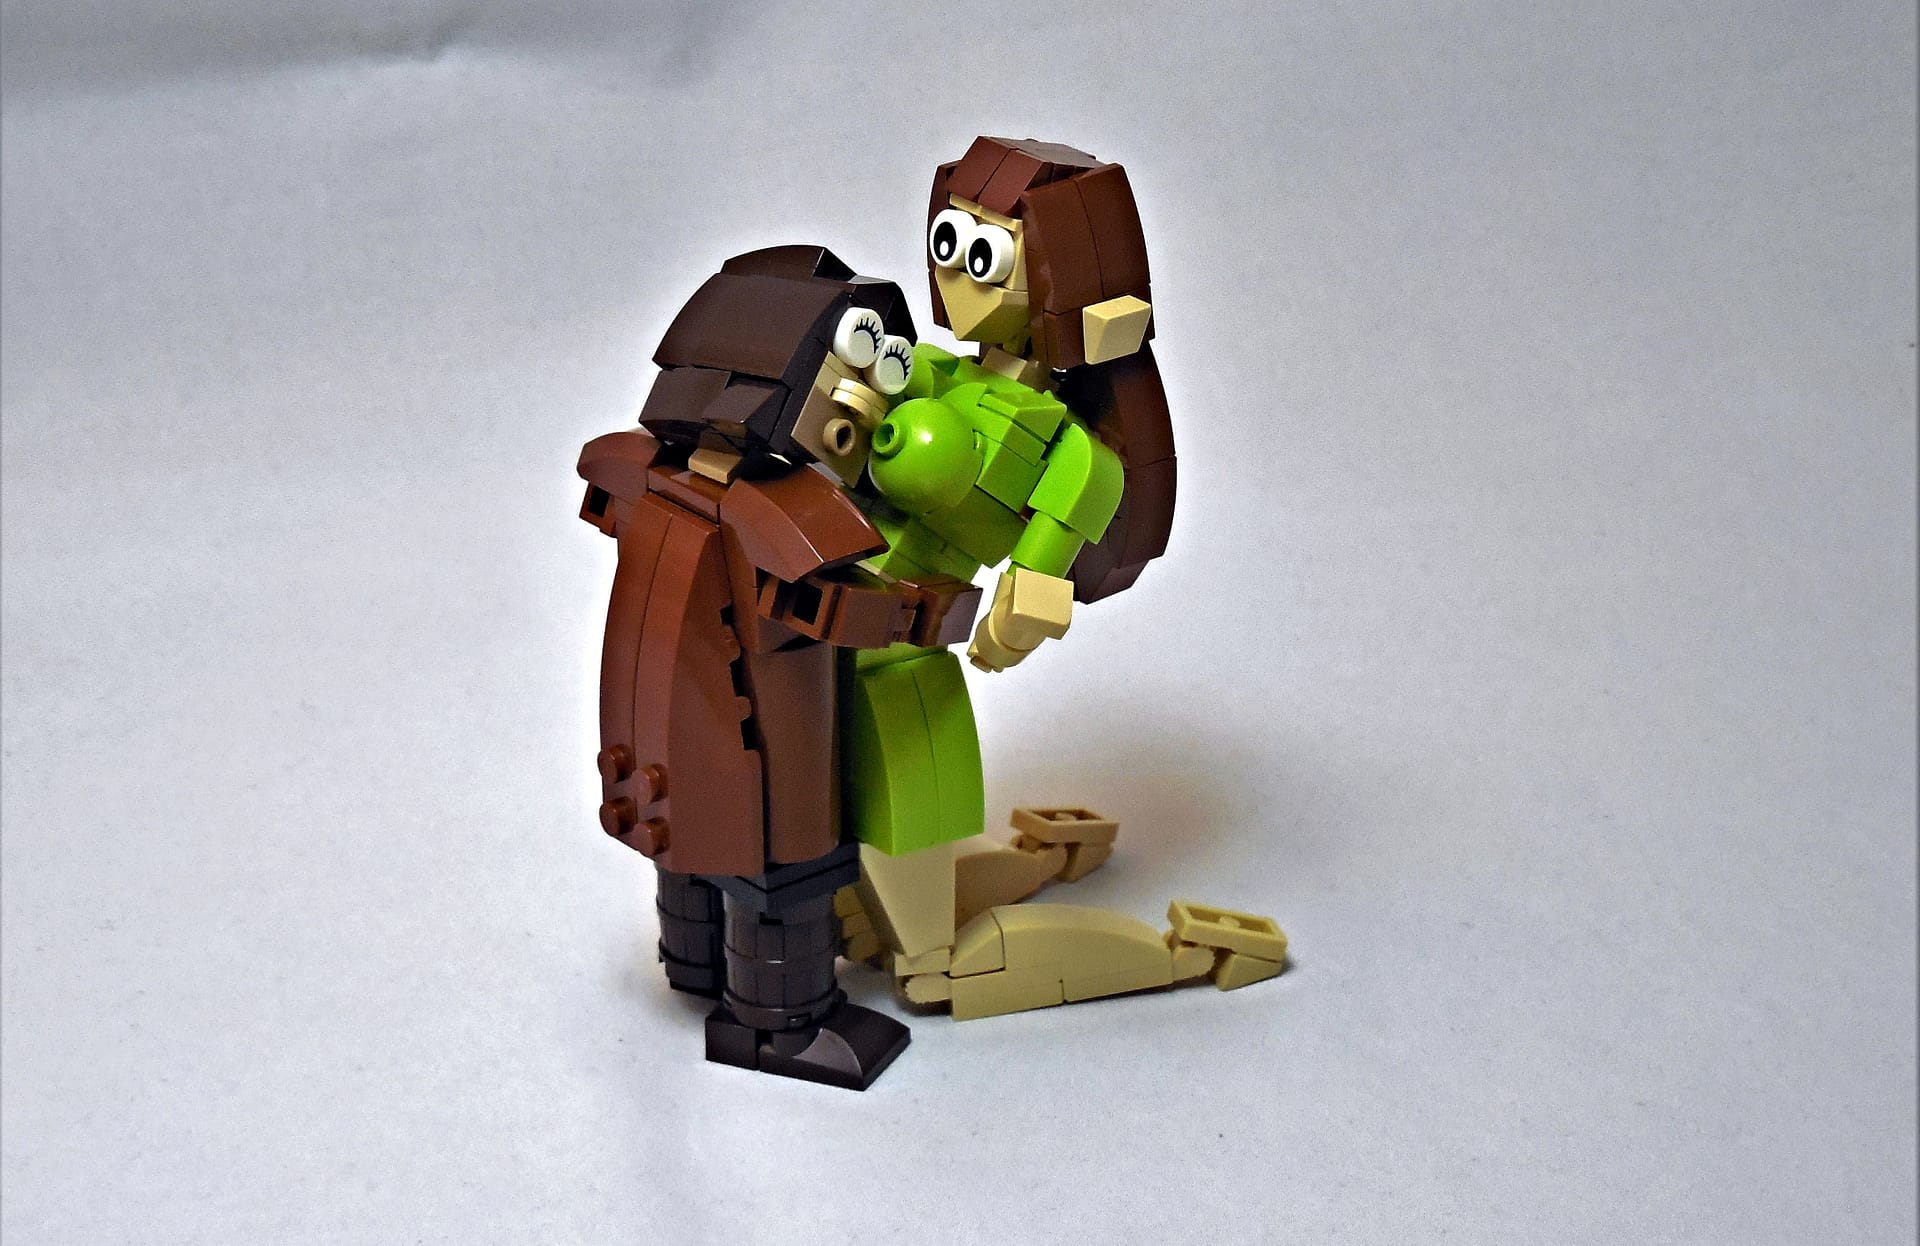 LEGO® MOC by Vitreolum: He’s quite tall for a dwarf, don’t you think?